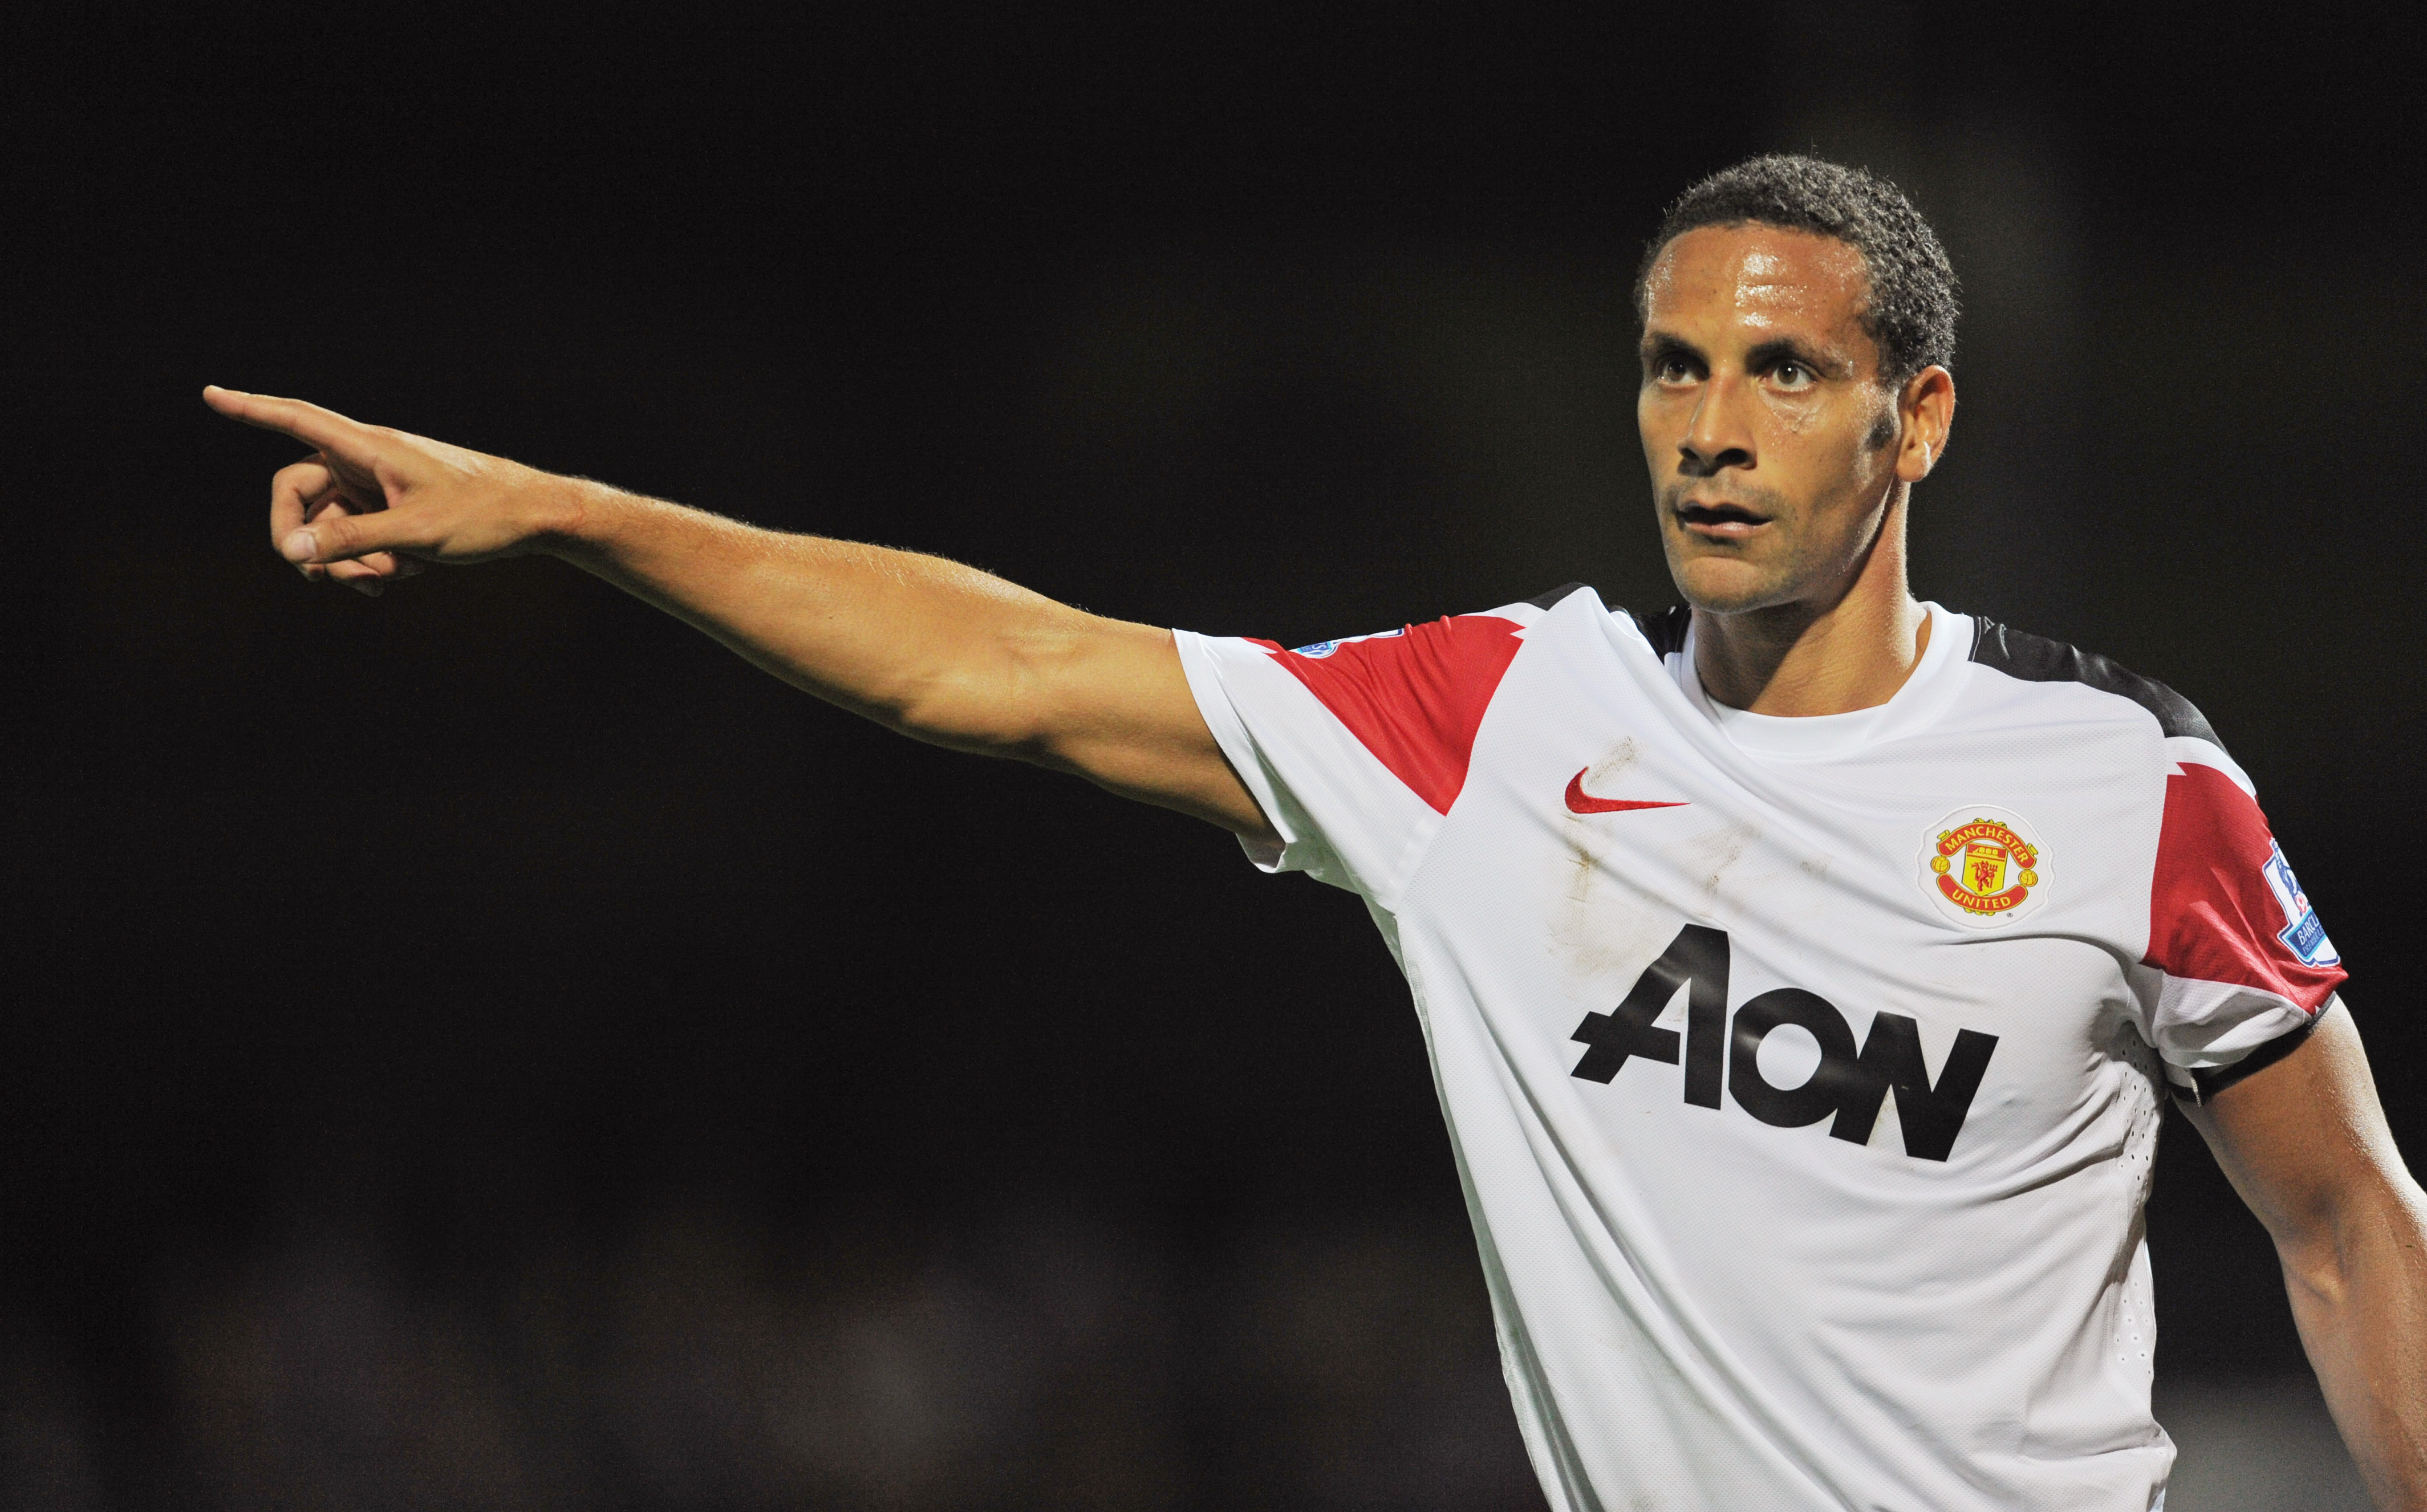 SCUNTHORPE, ENGLAND - SEPTEMBER 22: Rio Ferdinand of Manchester United gestures during the Carling Cup 3rd Round match between Scunthorpe United and Manchester United at Glanford Park on September 22, 2010 in Scunthorpe, England.  (Photo by Michael Regan/